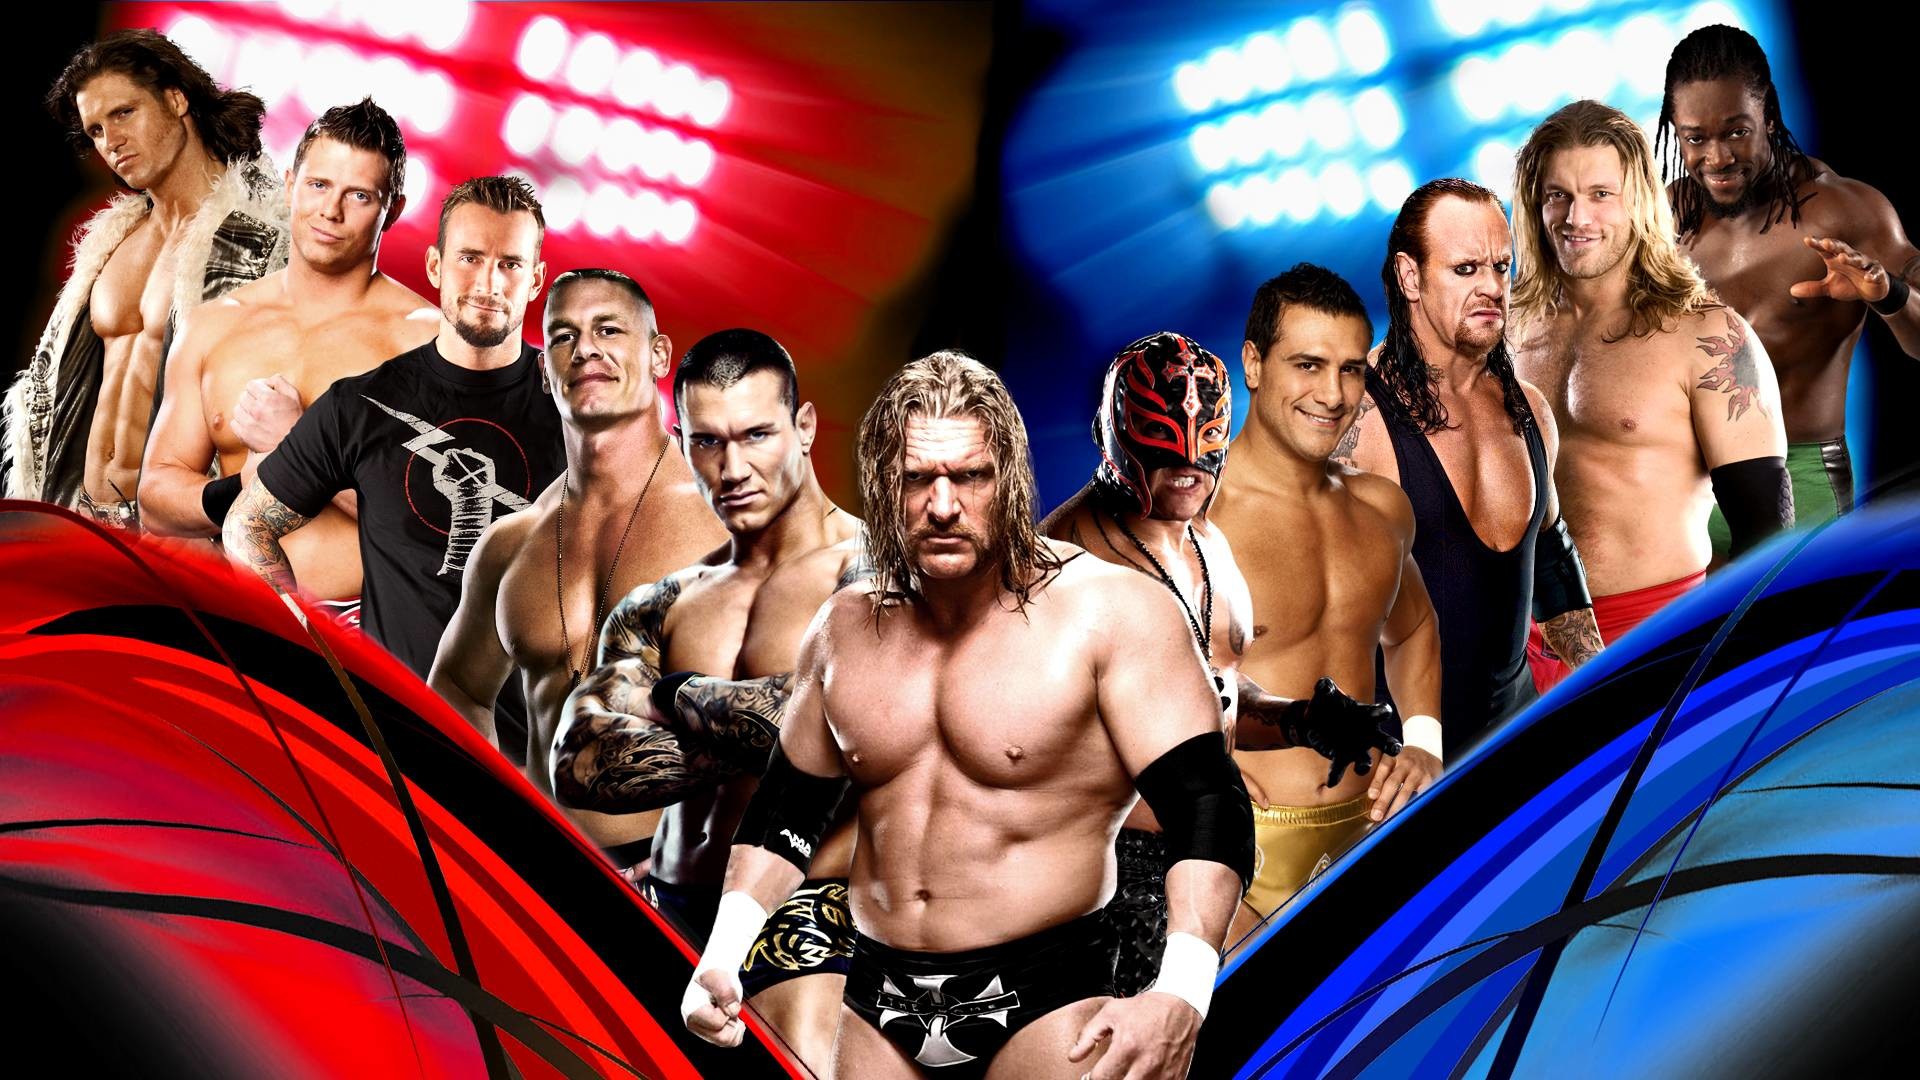 1920x1080 New Cover and Wallpaper I made!! - SmackDown vs Raw 2011 - CAWs.